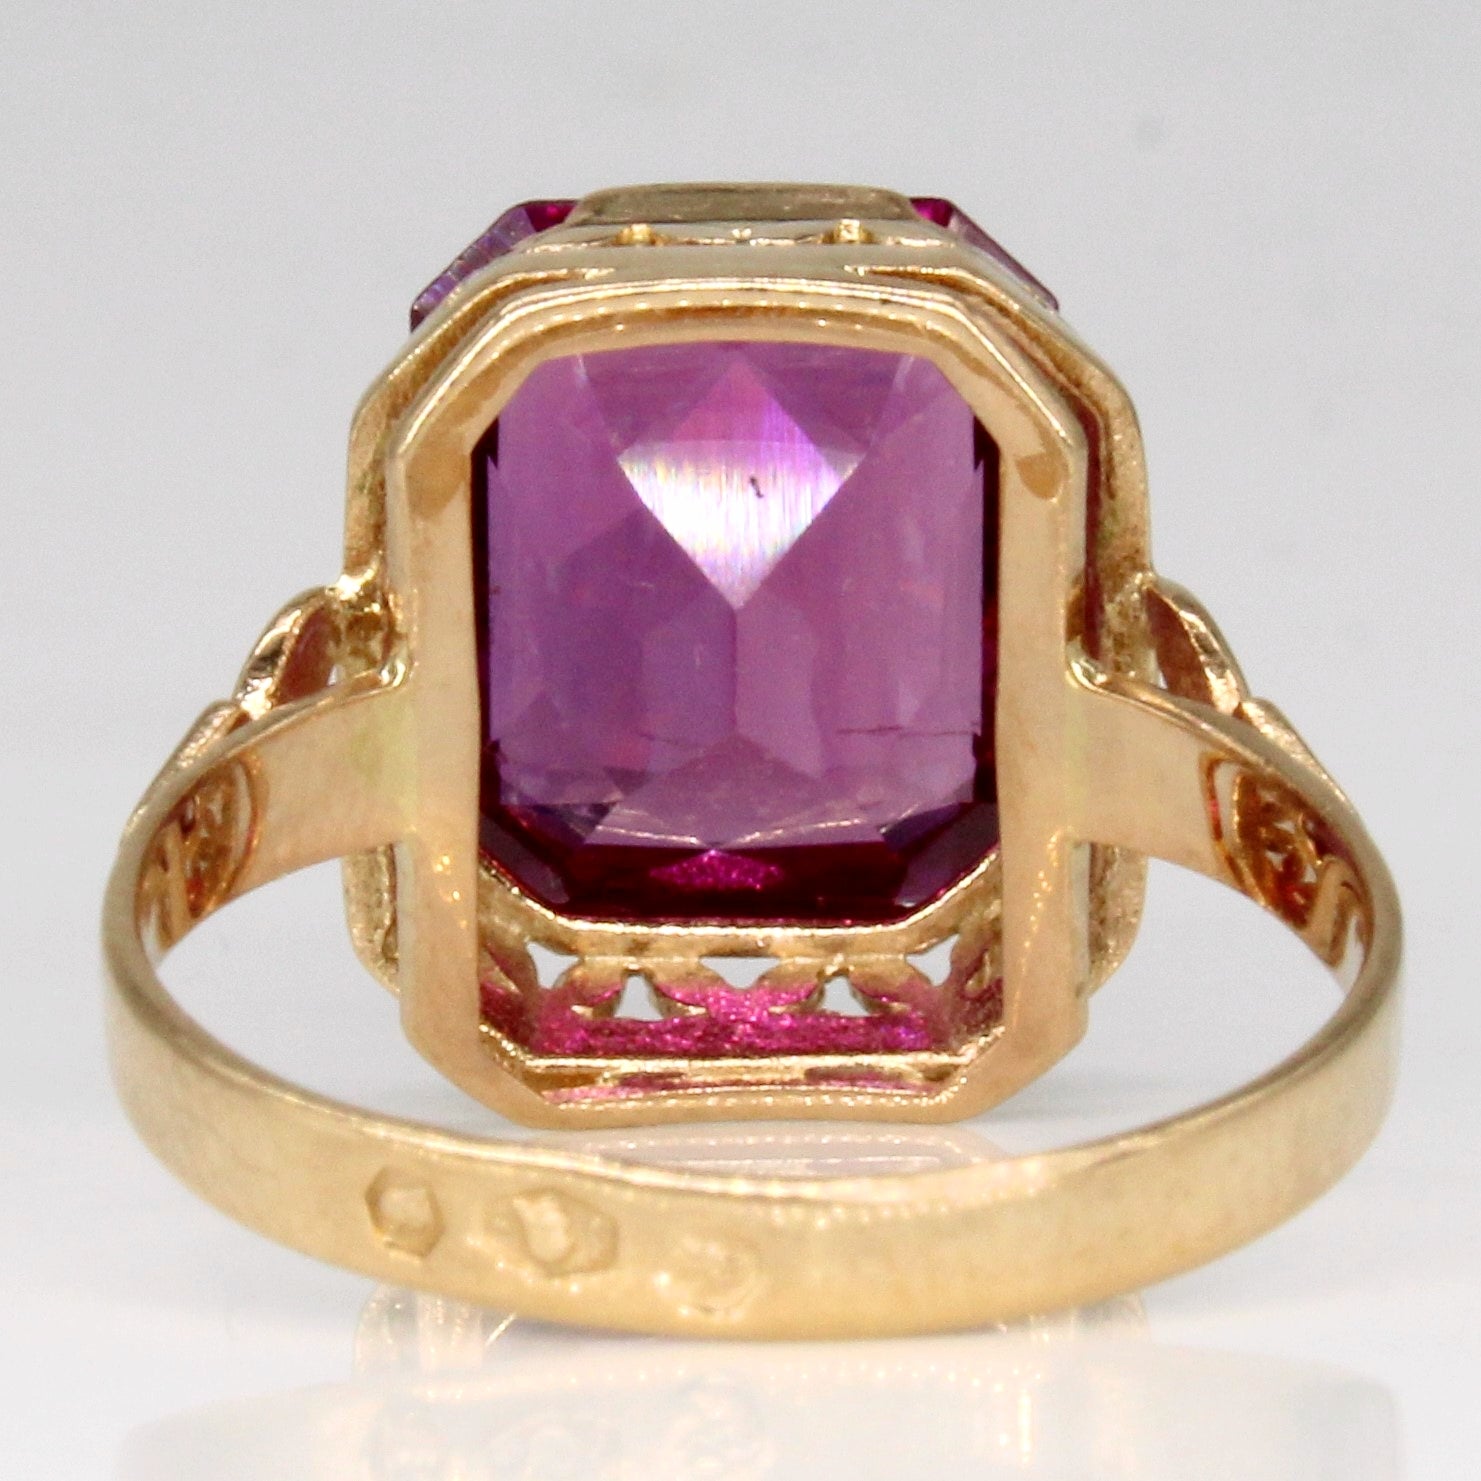 Synthetic Purple Sapphire Cocktail Ring | 7.55ct | SZ 7.5 |